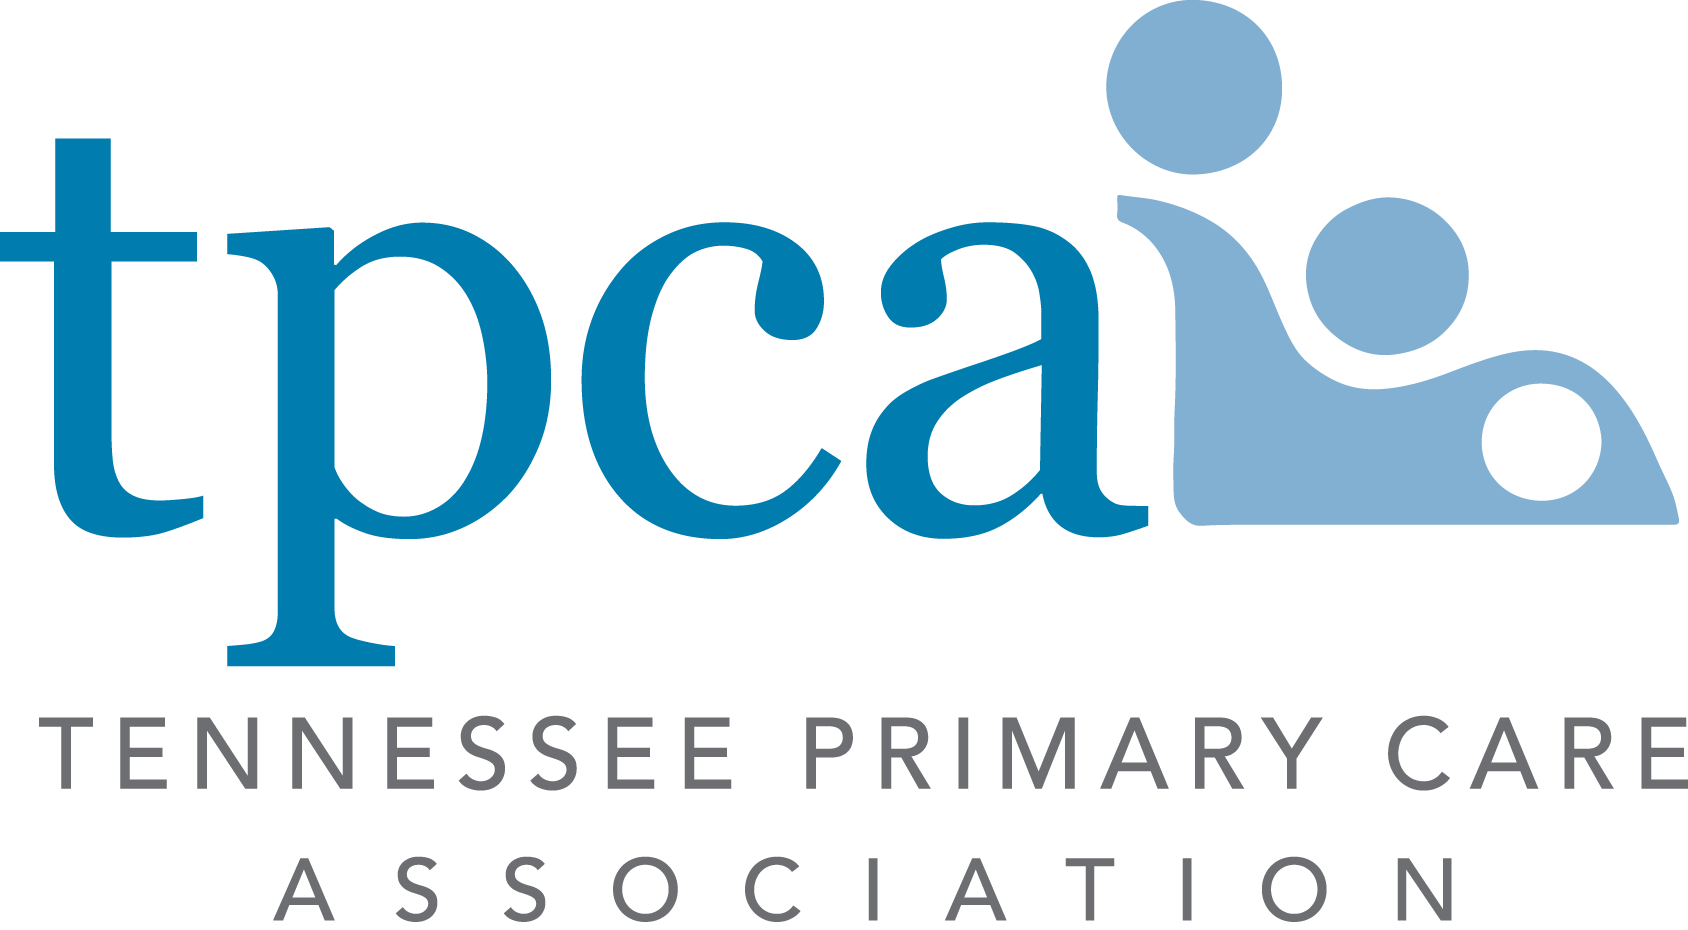 Tennessee Primary Care Association logo